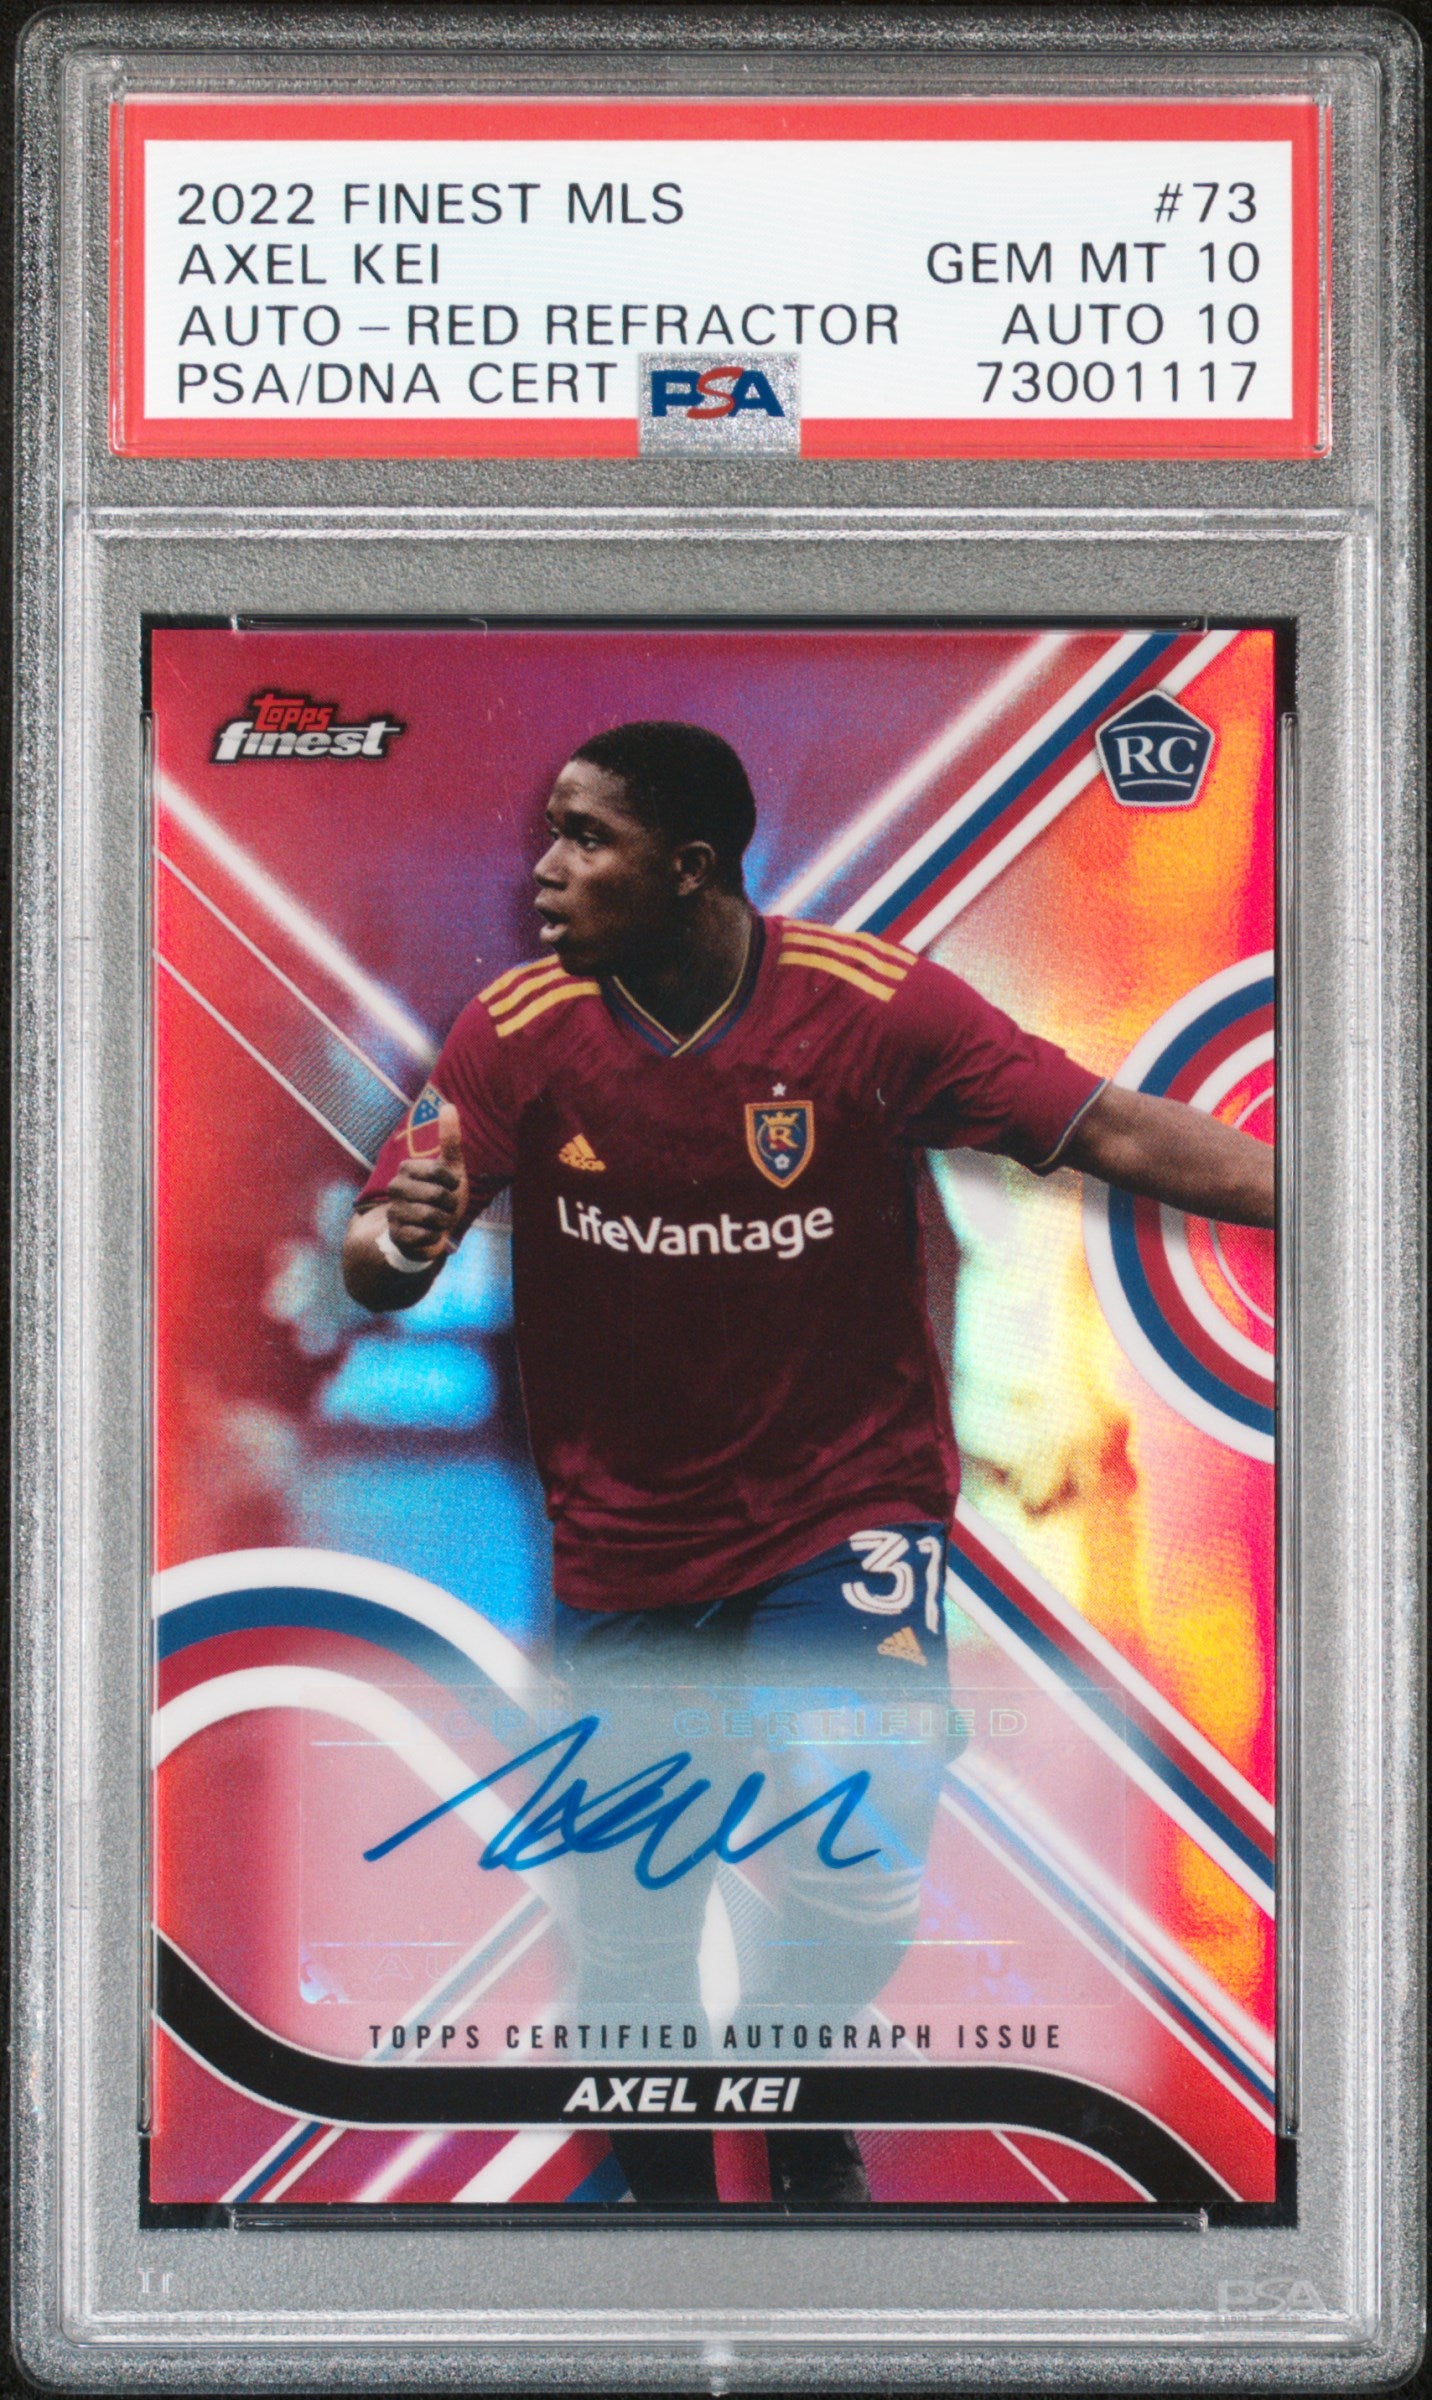 2022 TOPPS FINEST MLS AXEL KEI RED REFRACTOR 1/5 PSA 10 AUTO 10